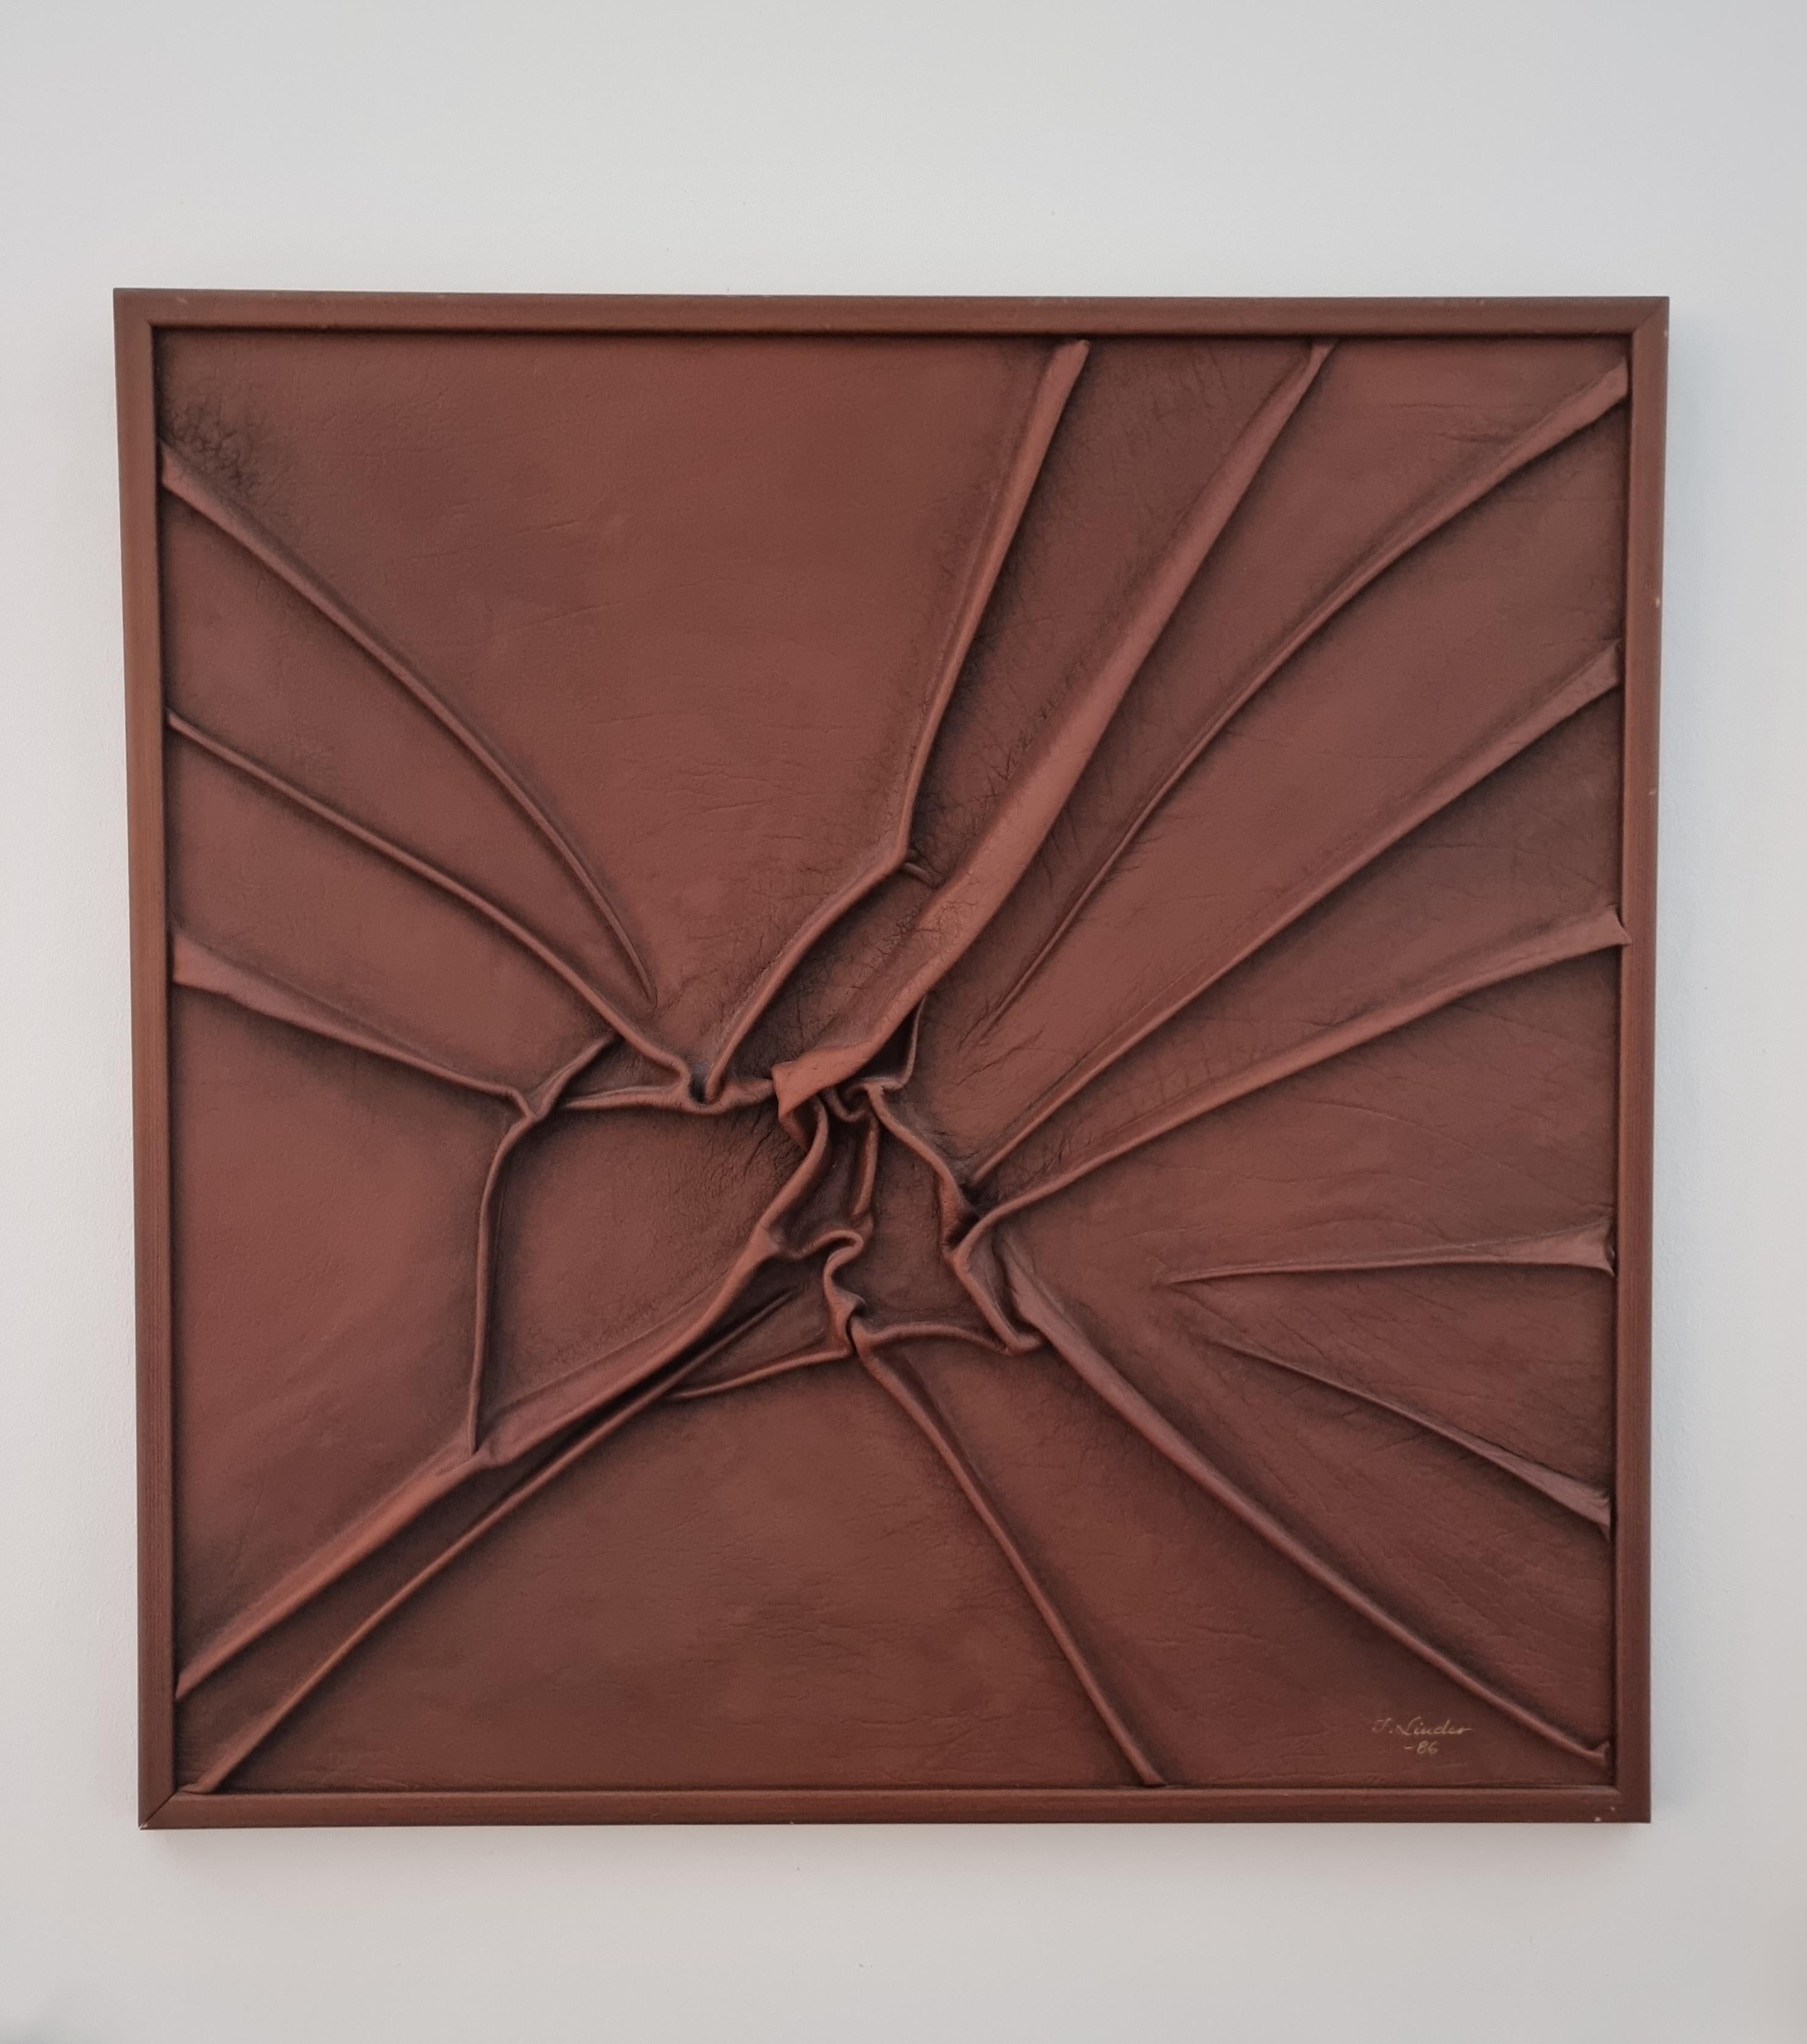 Abstract wall relief / art by Swedish artist Ing-Marie Linder. 

The folded leather creates warmth and depth. A unique, hand-made decorative work of art. 

Signed and dated -86. Additional information from exhibition a tergo. 

Please feel free to